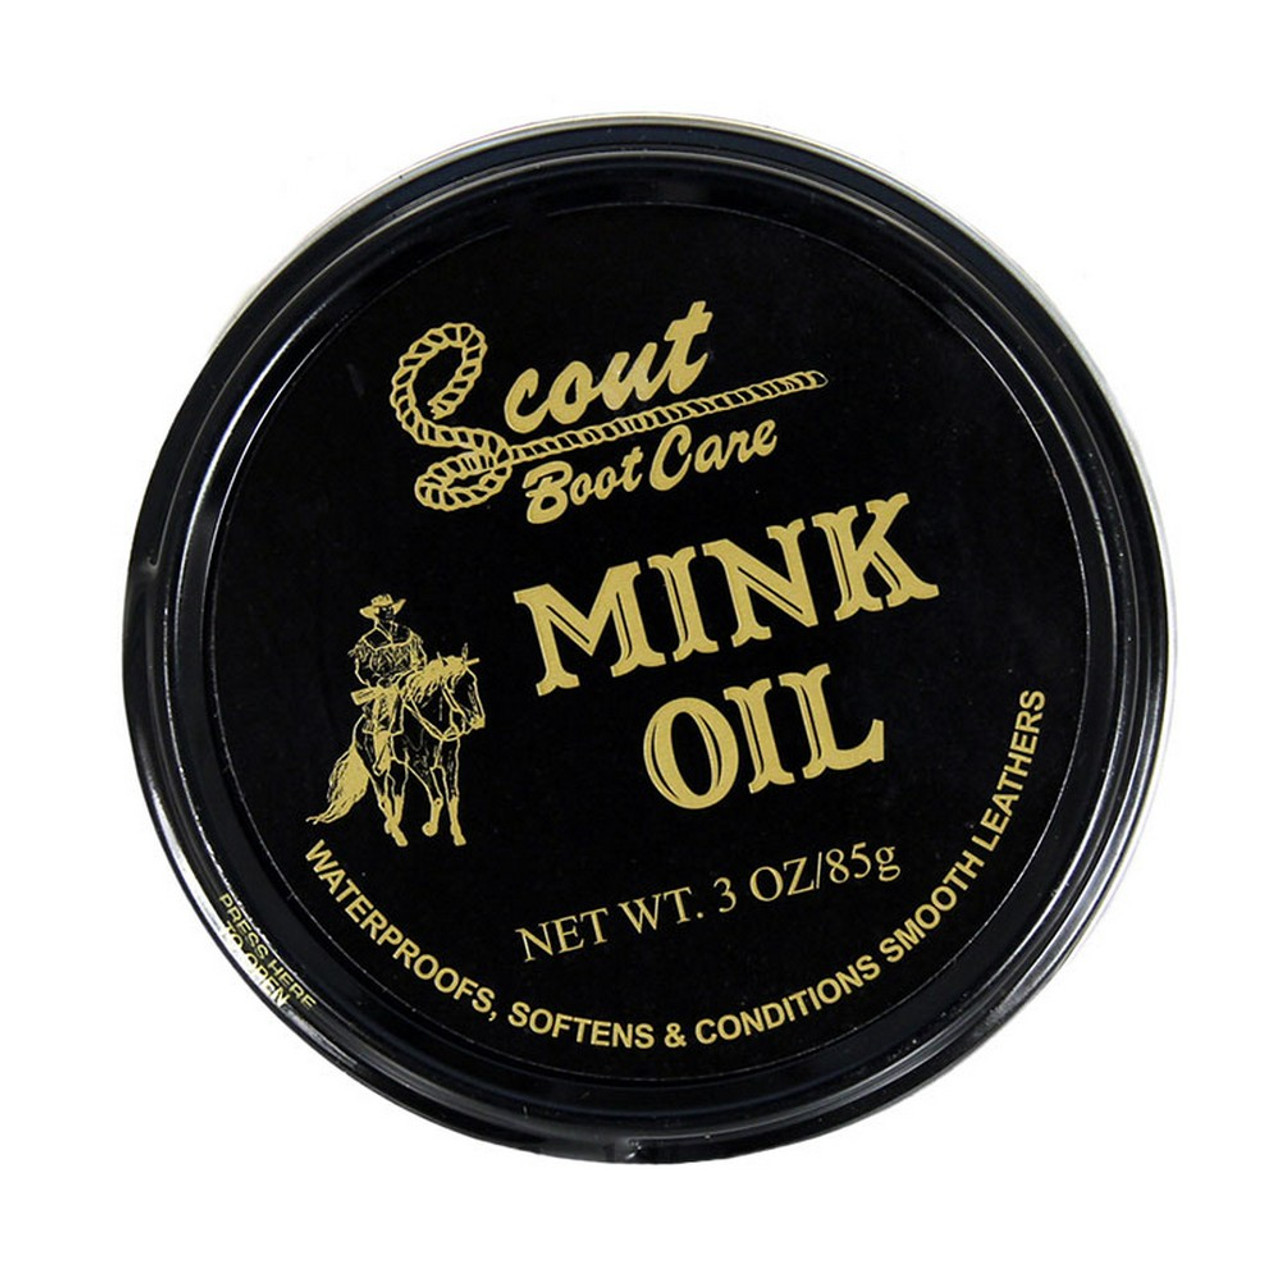 Saddle Soap vs Mink Oil: Which Is Best For Your Boots?